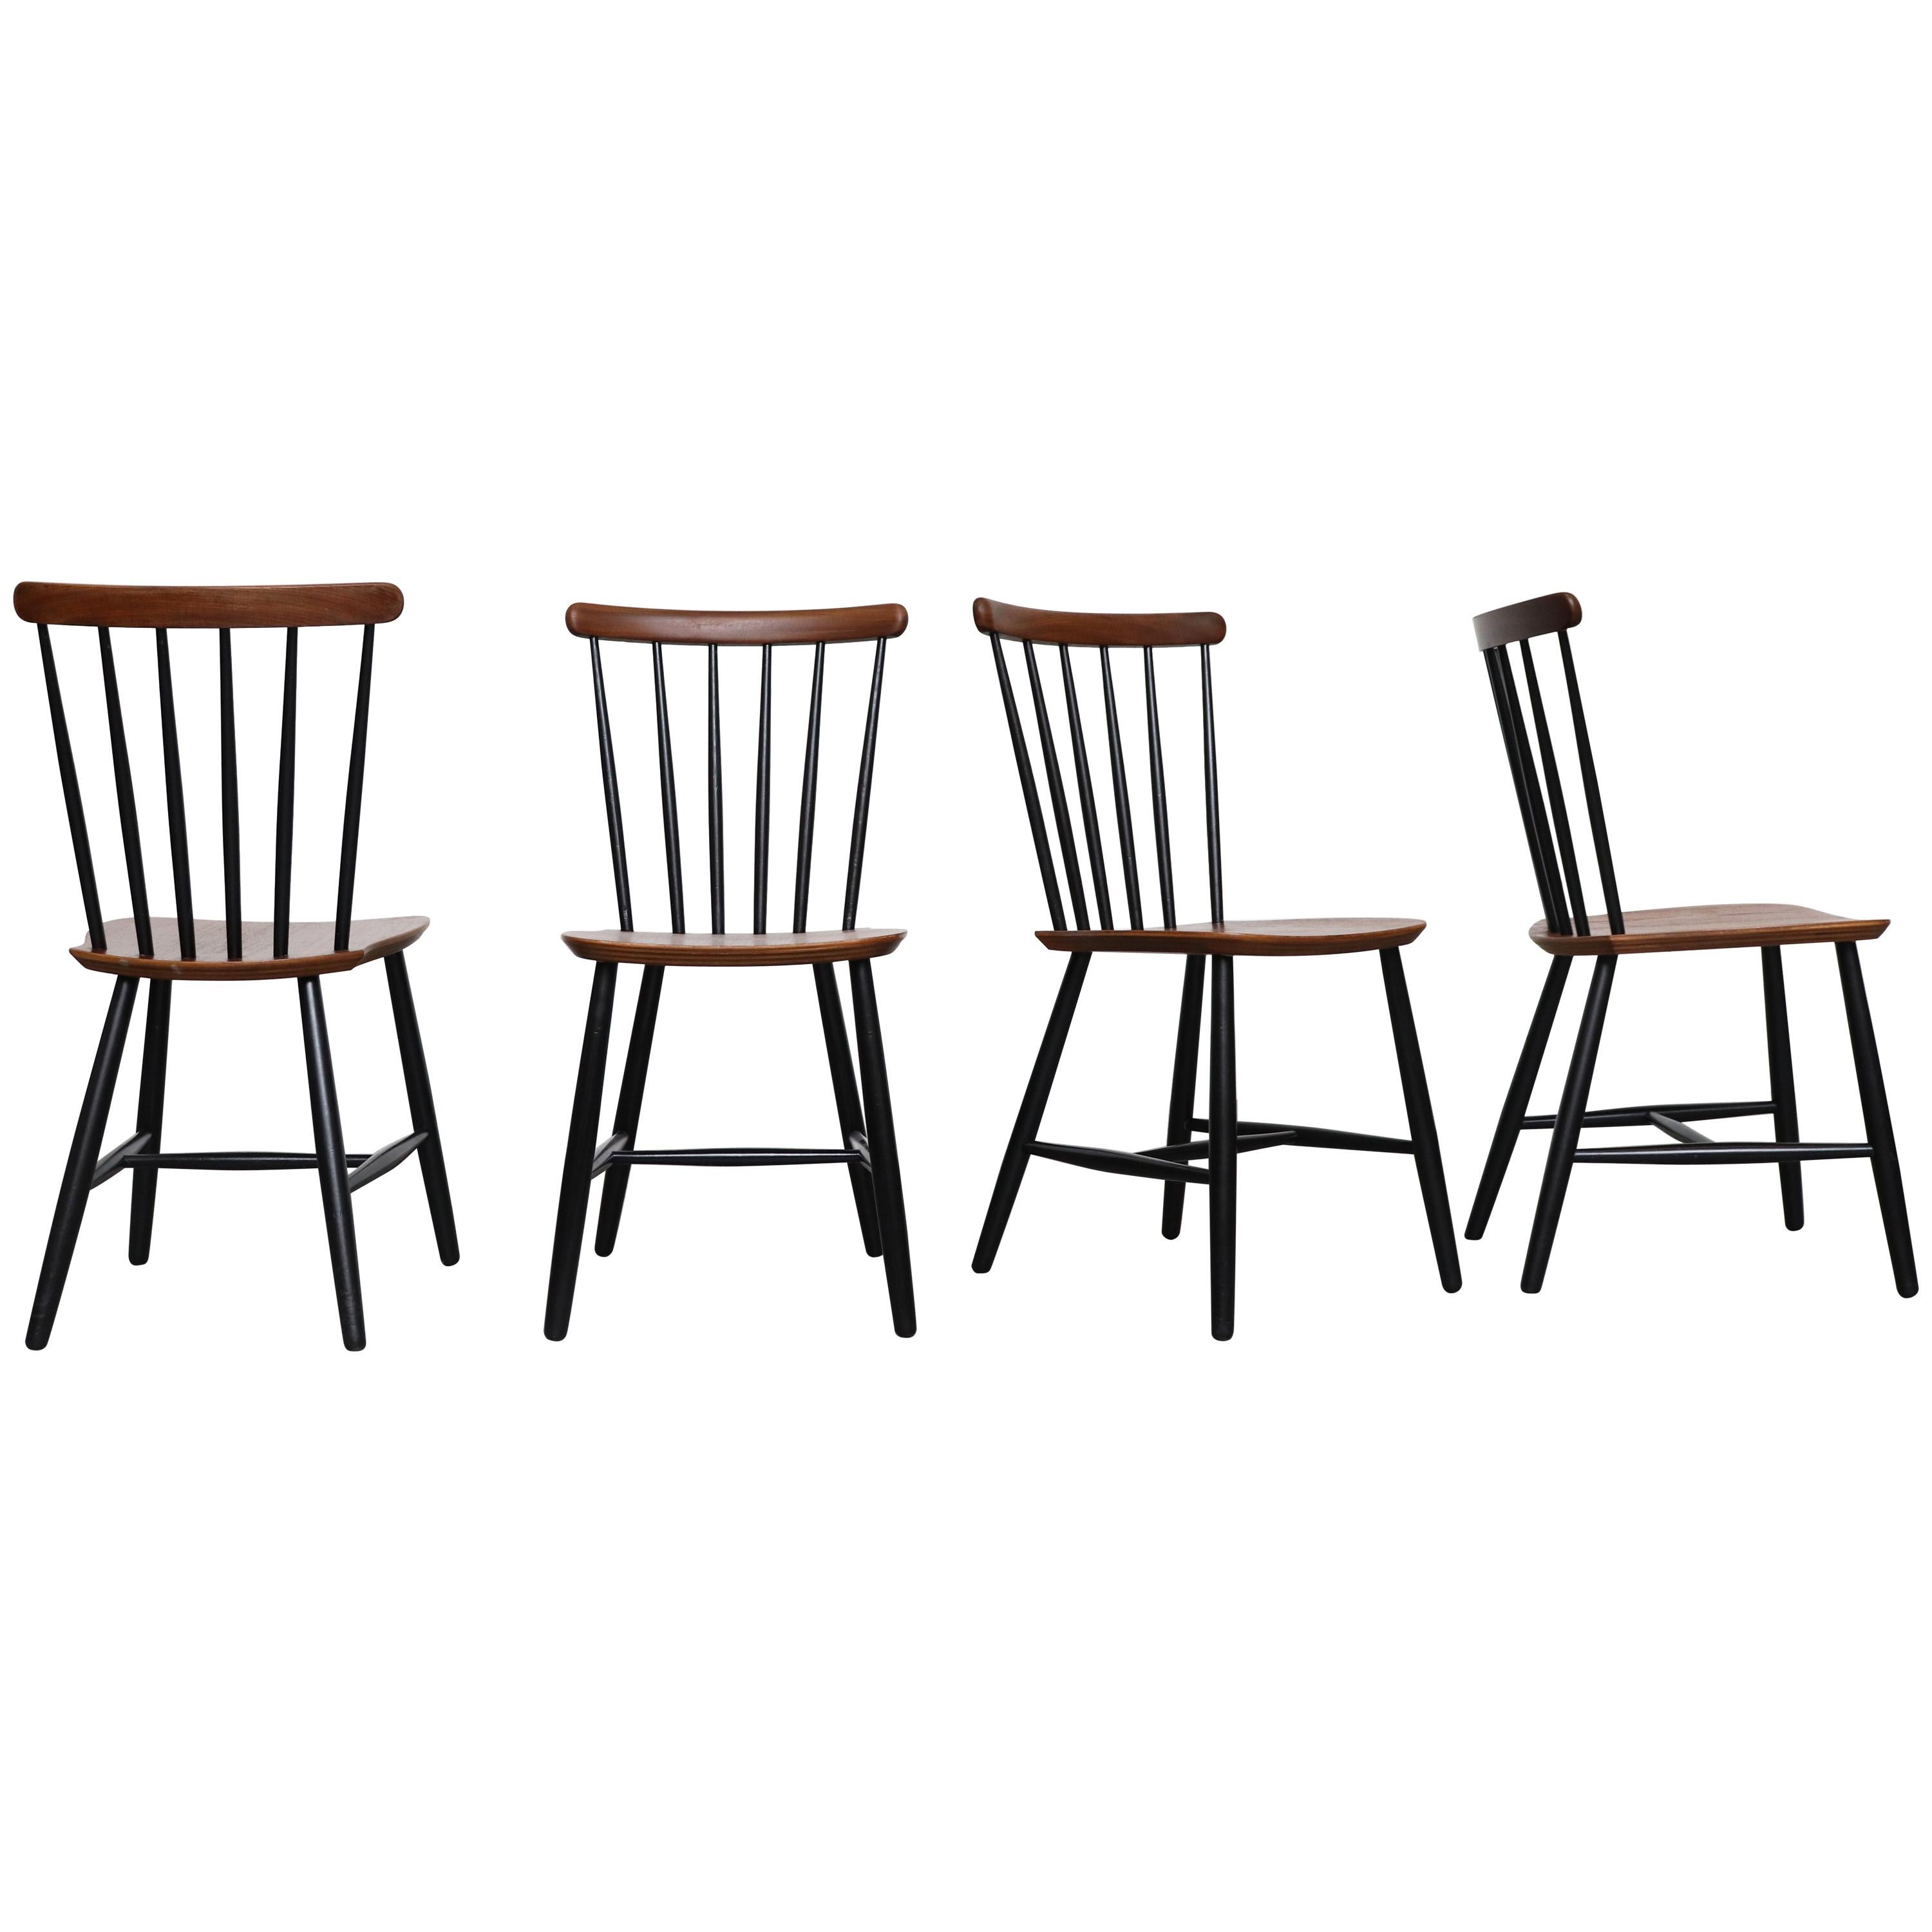 Set of 4 Tapiovaara Style Spindle Back Chairs